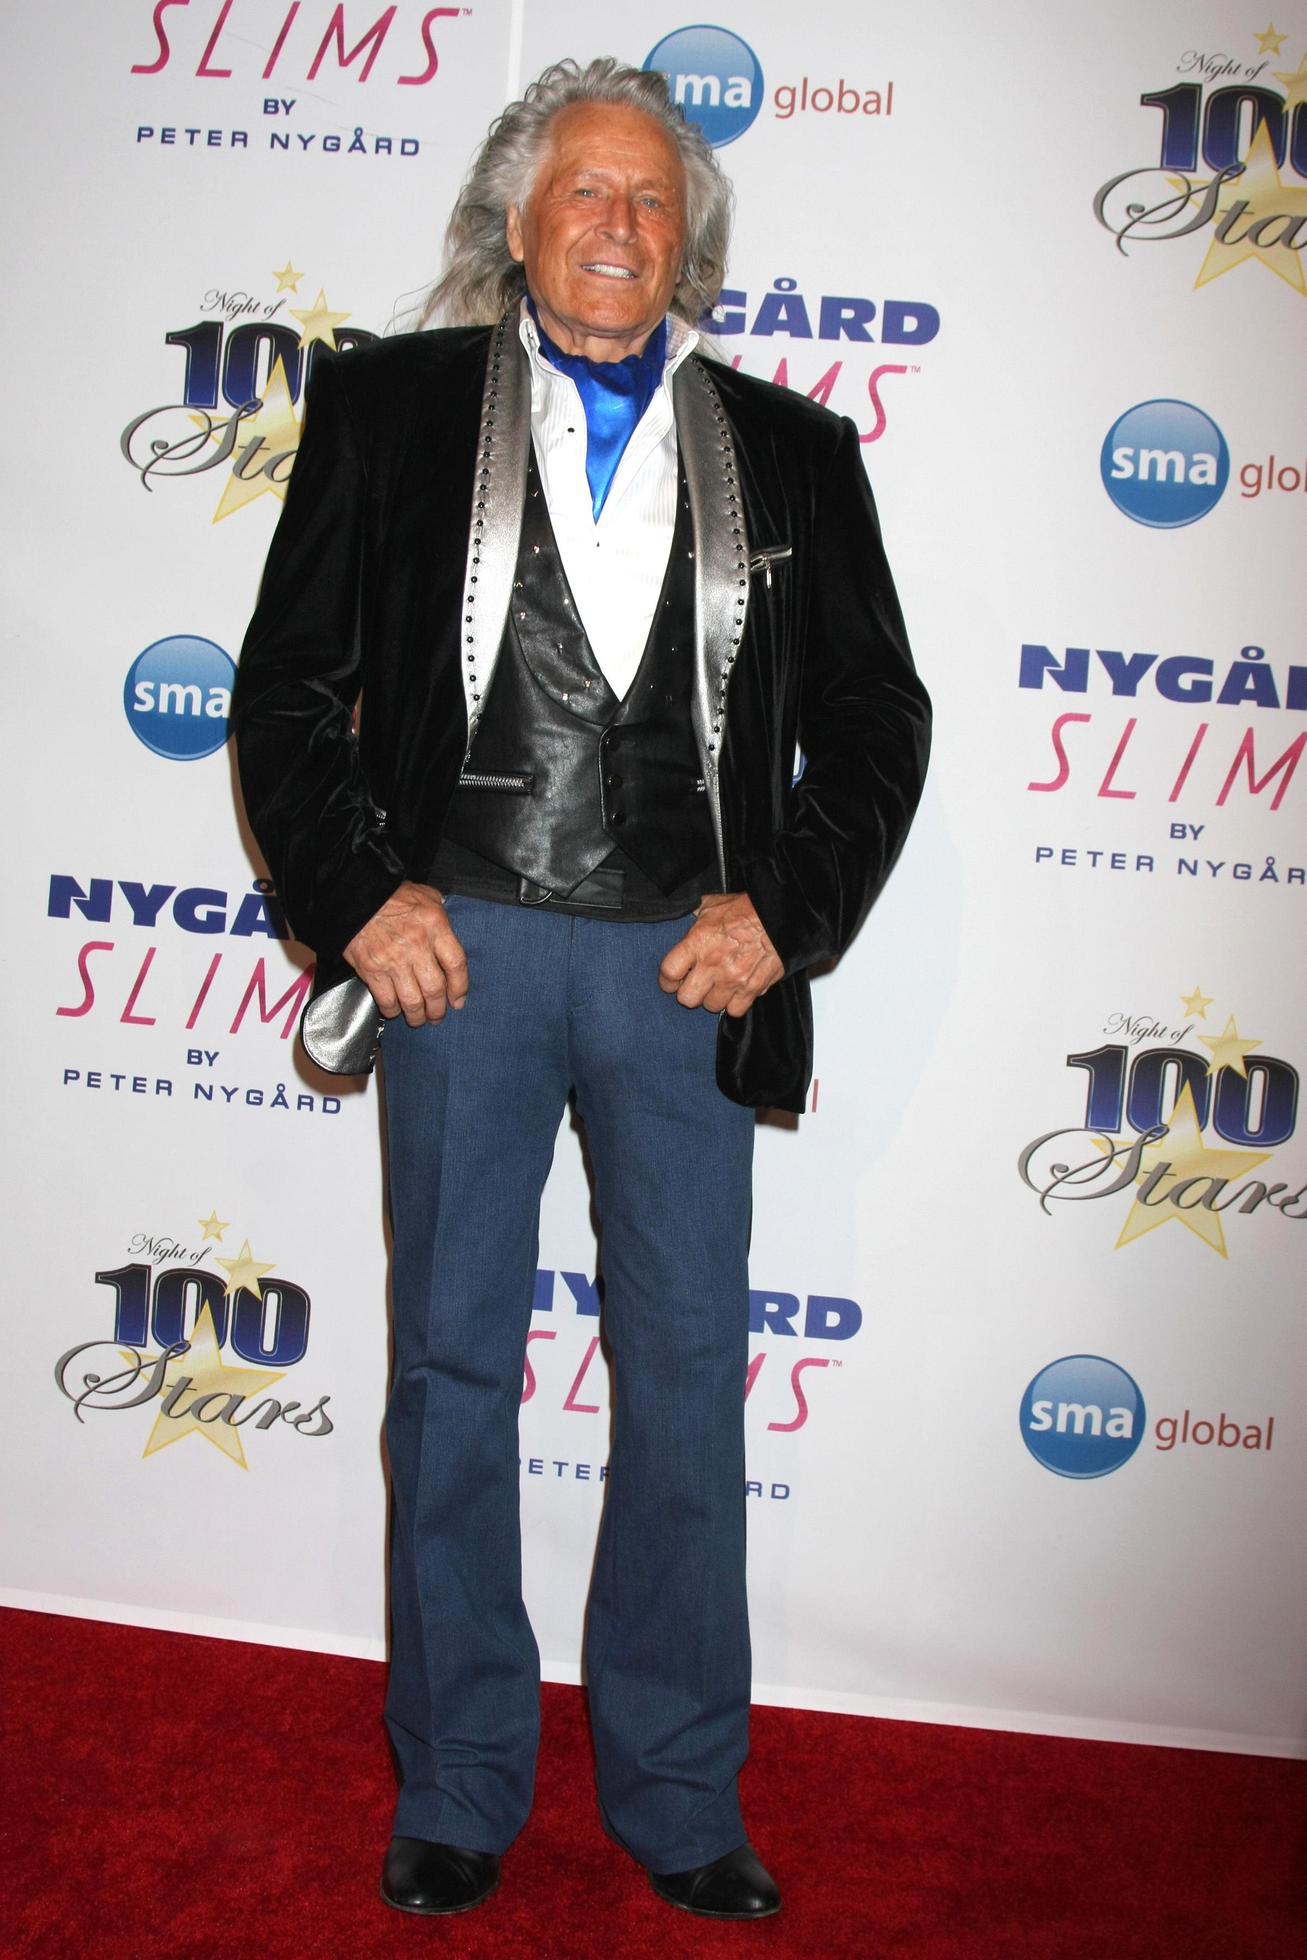 los-angeles-feb-22-peter-nygard-at-the-night-of-100-stars-oscar-viewing-party-at-the-beverly-hilton-hotel-on-february-22-2015-in-beverly-hills-ca-free-photo